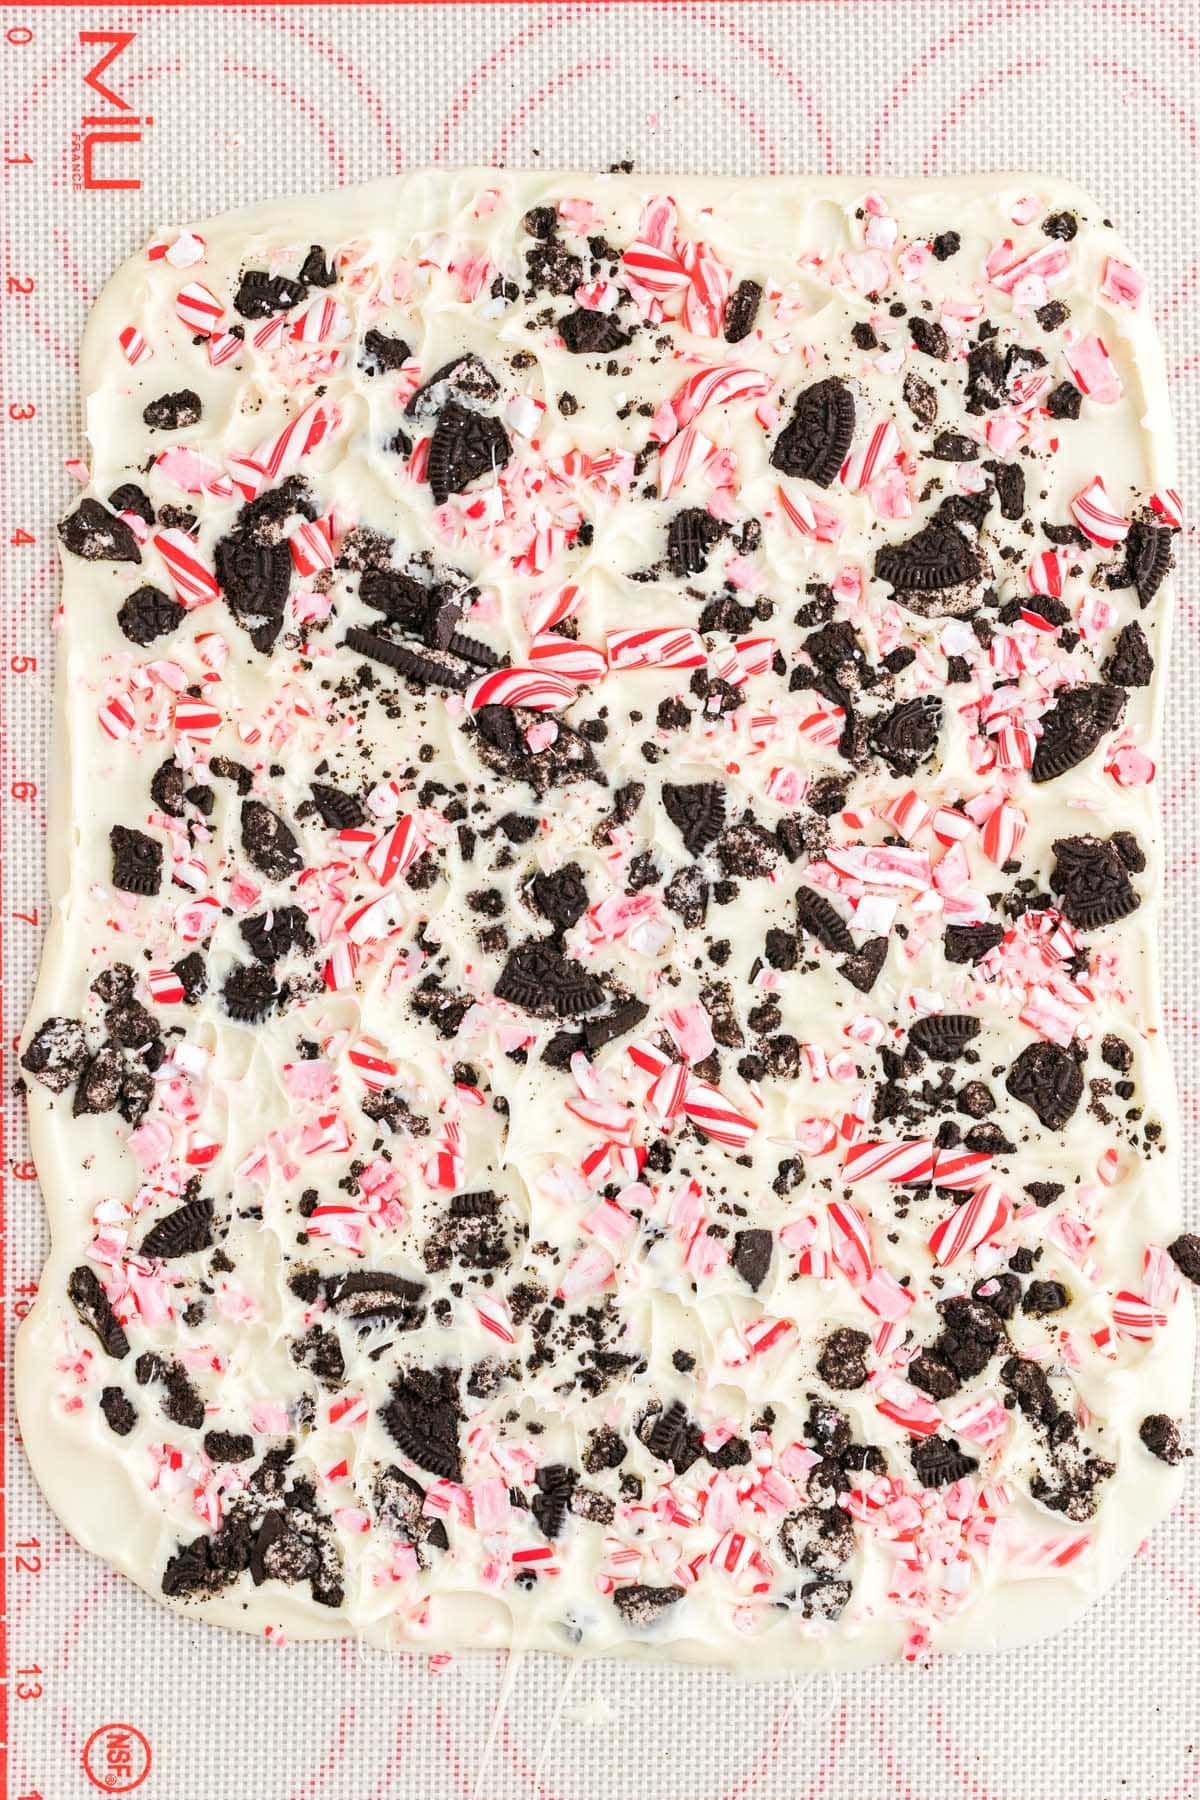 peppermint bark on silicone baking mat